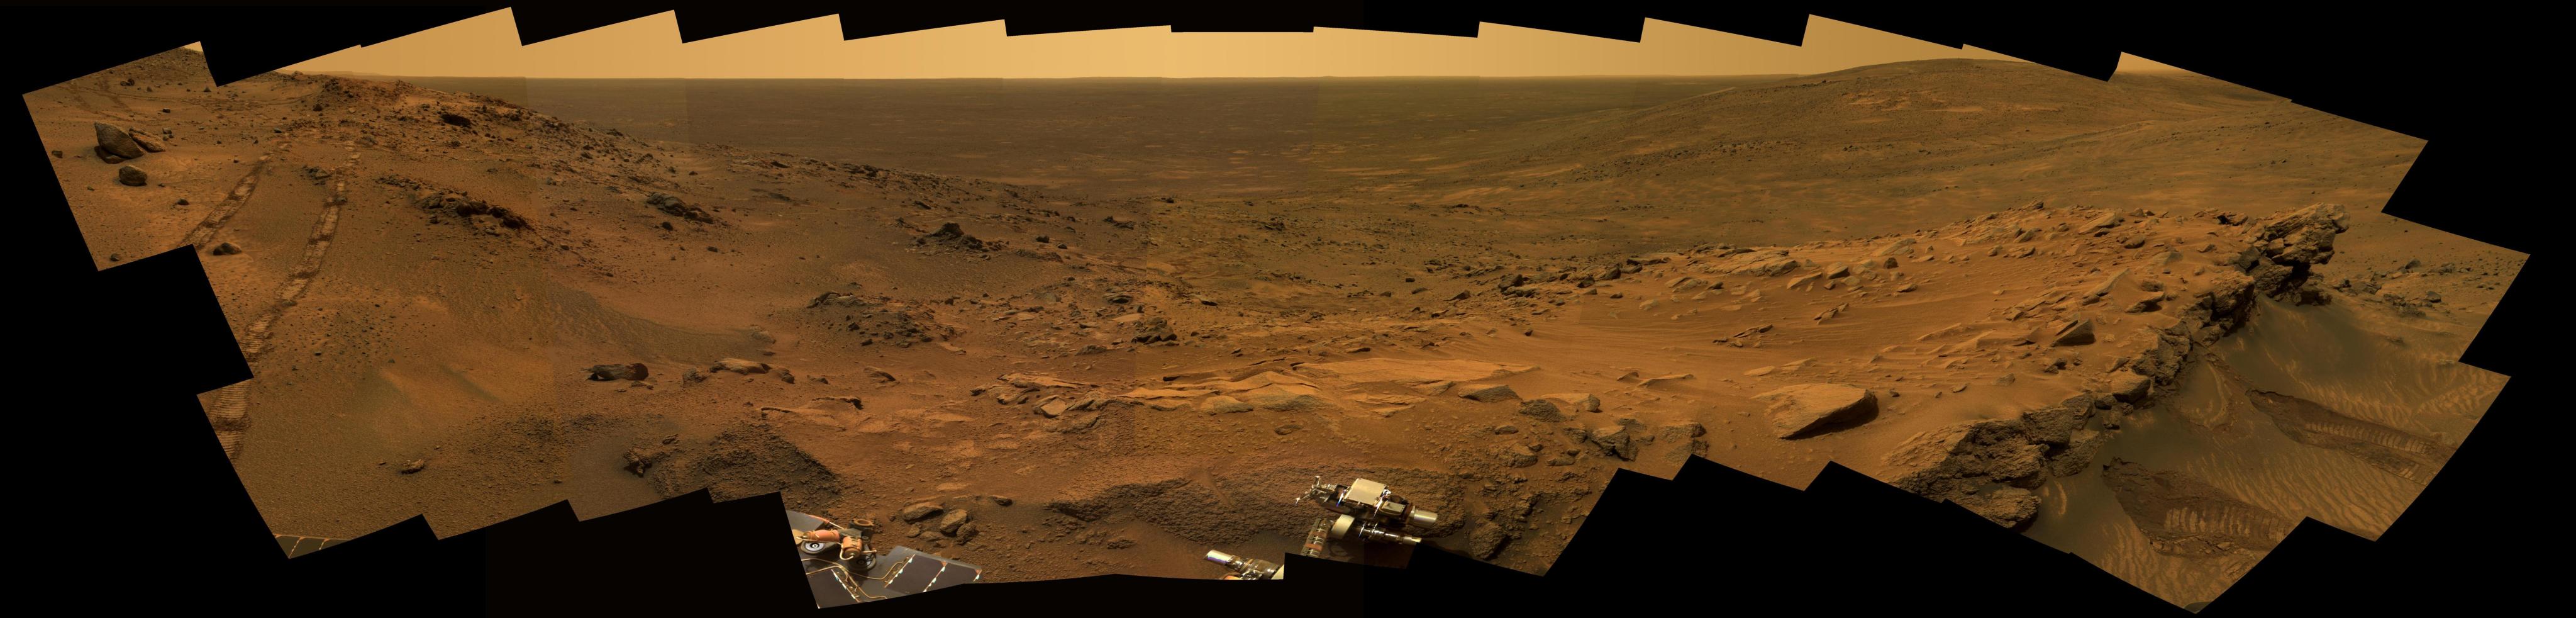 More than 1.5 years into their exploration of Mars, both of NASA's Mars Exploration Rovers continue to send a cornucopia of images to Earth.